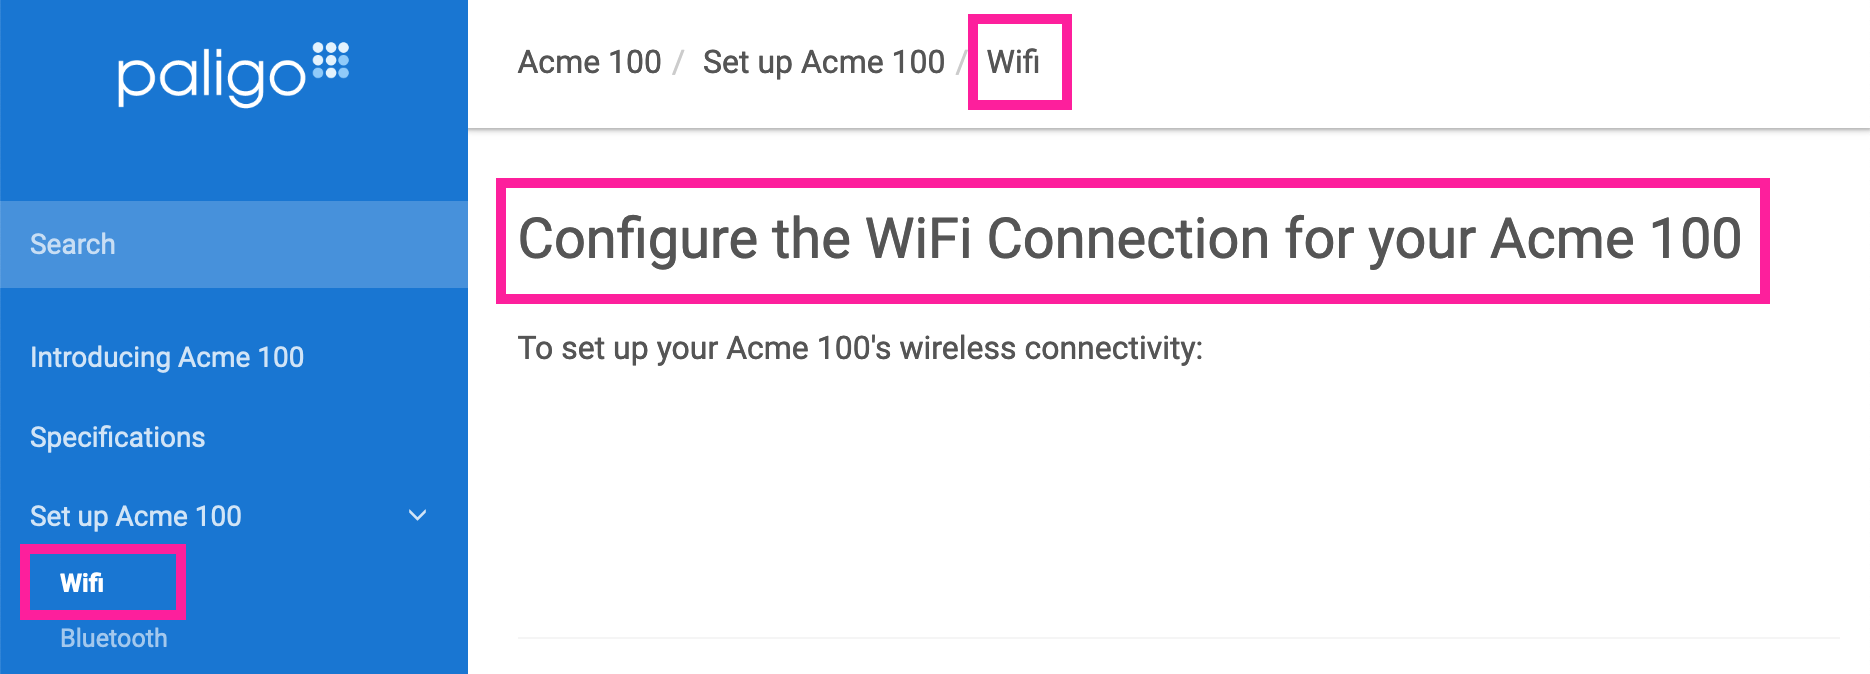 Published HTML5 page showing the table of contents has "WiFi" as the title. But in the main topic, the title is the longer title of "Configure the WiFi Connections for your ACME 100".